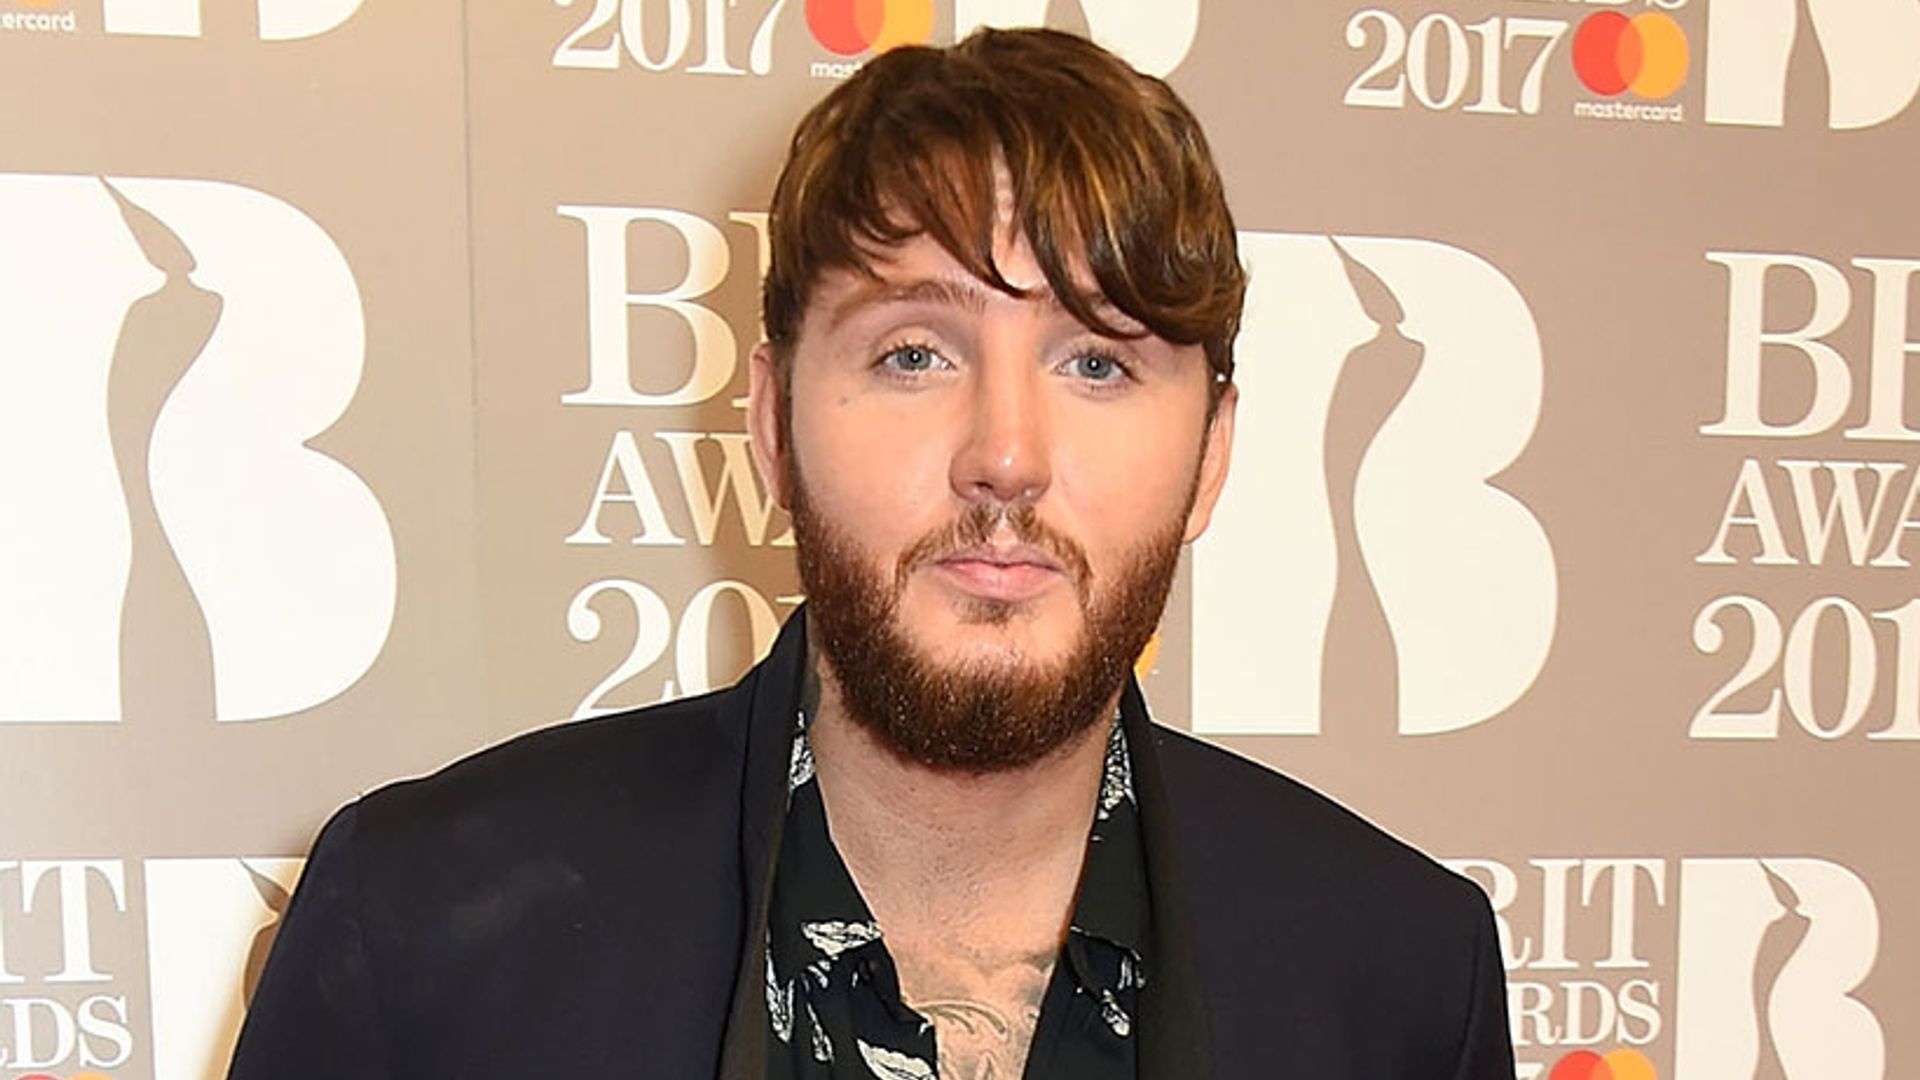 James Arthur reveals he still struggles with anxiety: 'I was fed up of beating myself up'